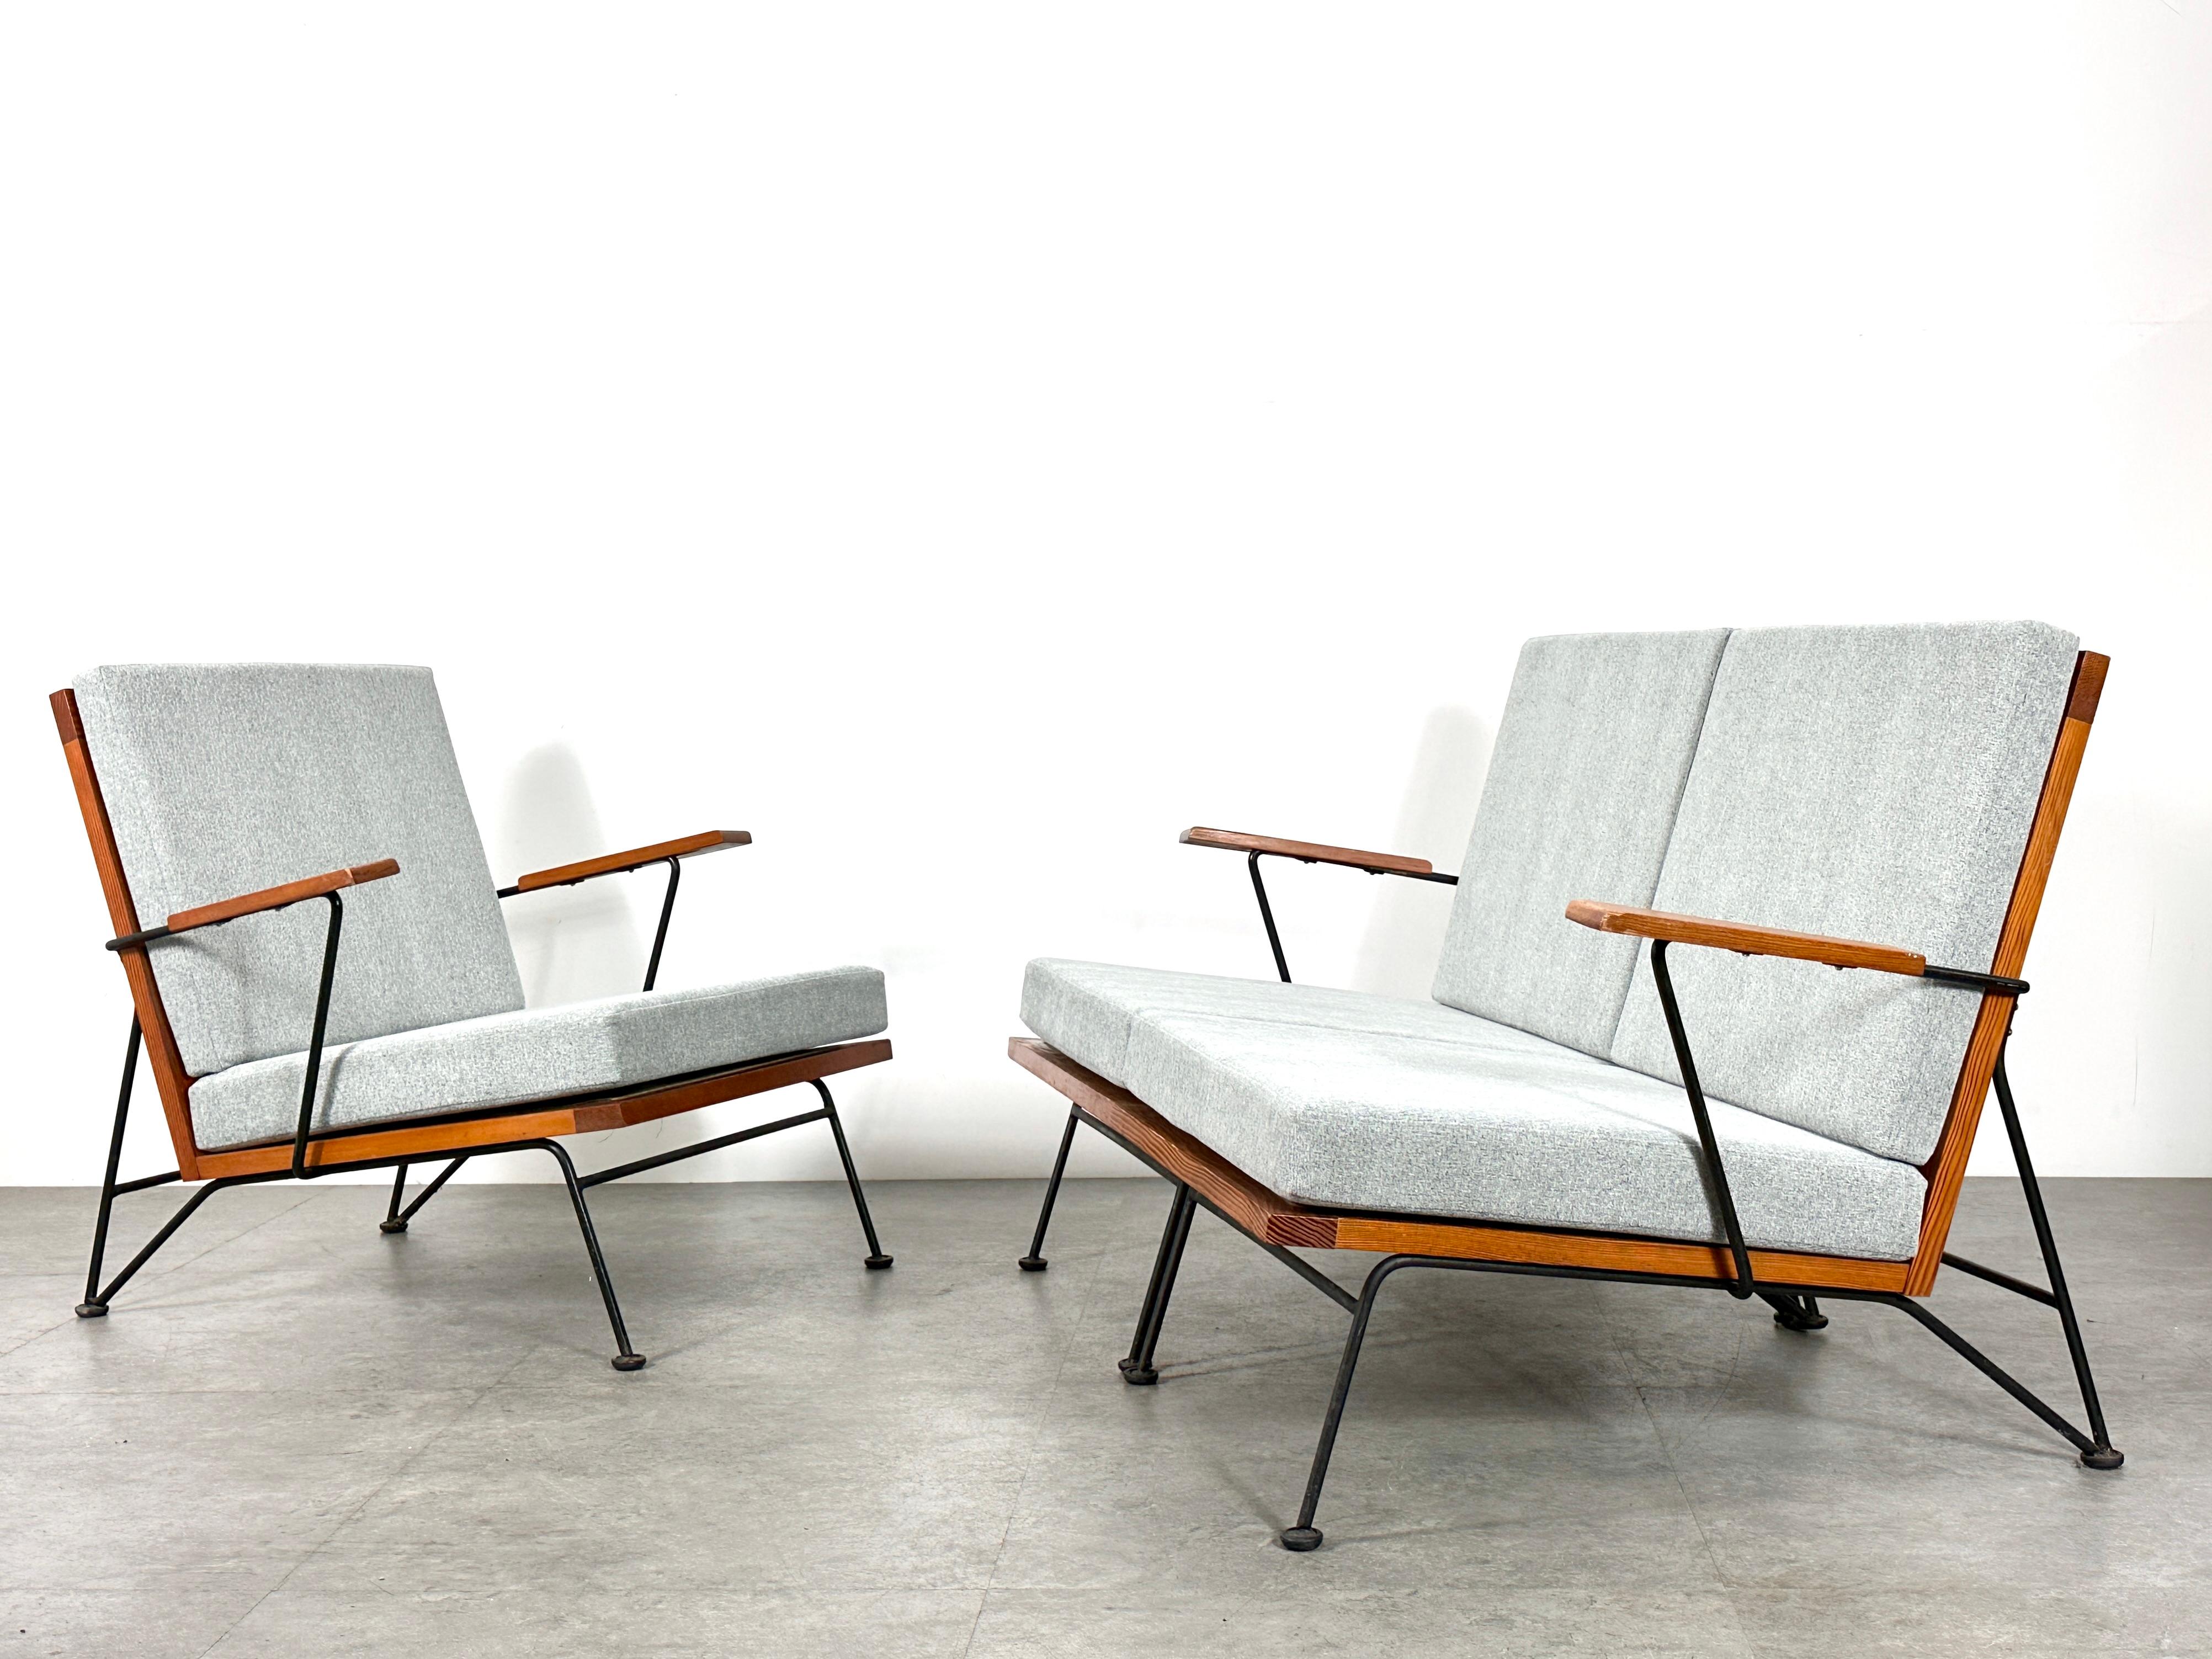 Three piece Sol-Air lounge group designed by Pipsan Saarinen Swanson for Ficks Reed 1940s - 1950s
Iron hairpin legs and pine wood frames with laced rope back rest
Two piece settee sofa and single armchair
New cushions in a light sage